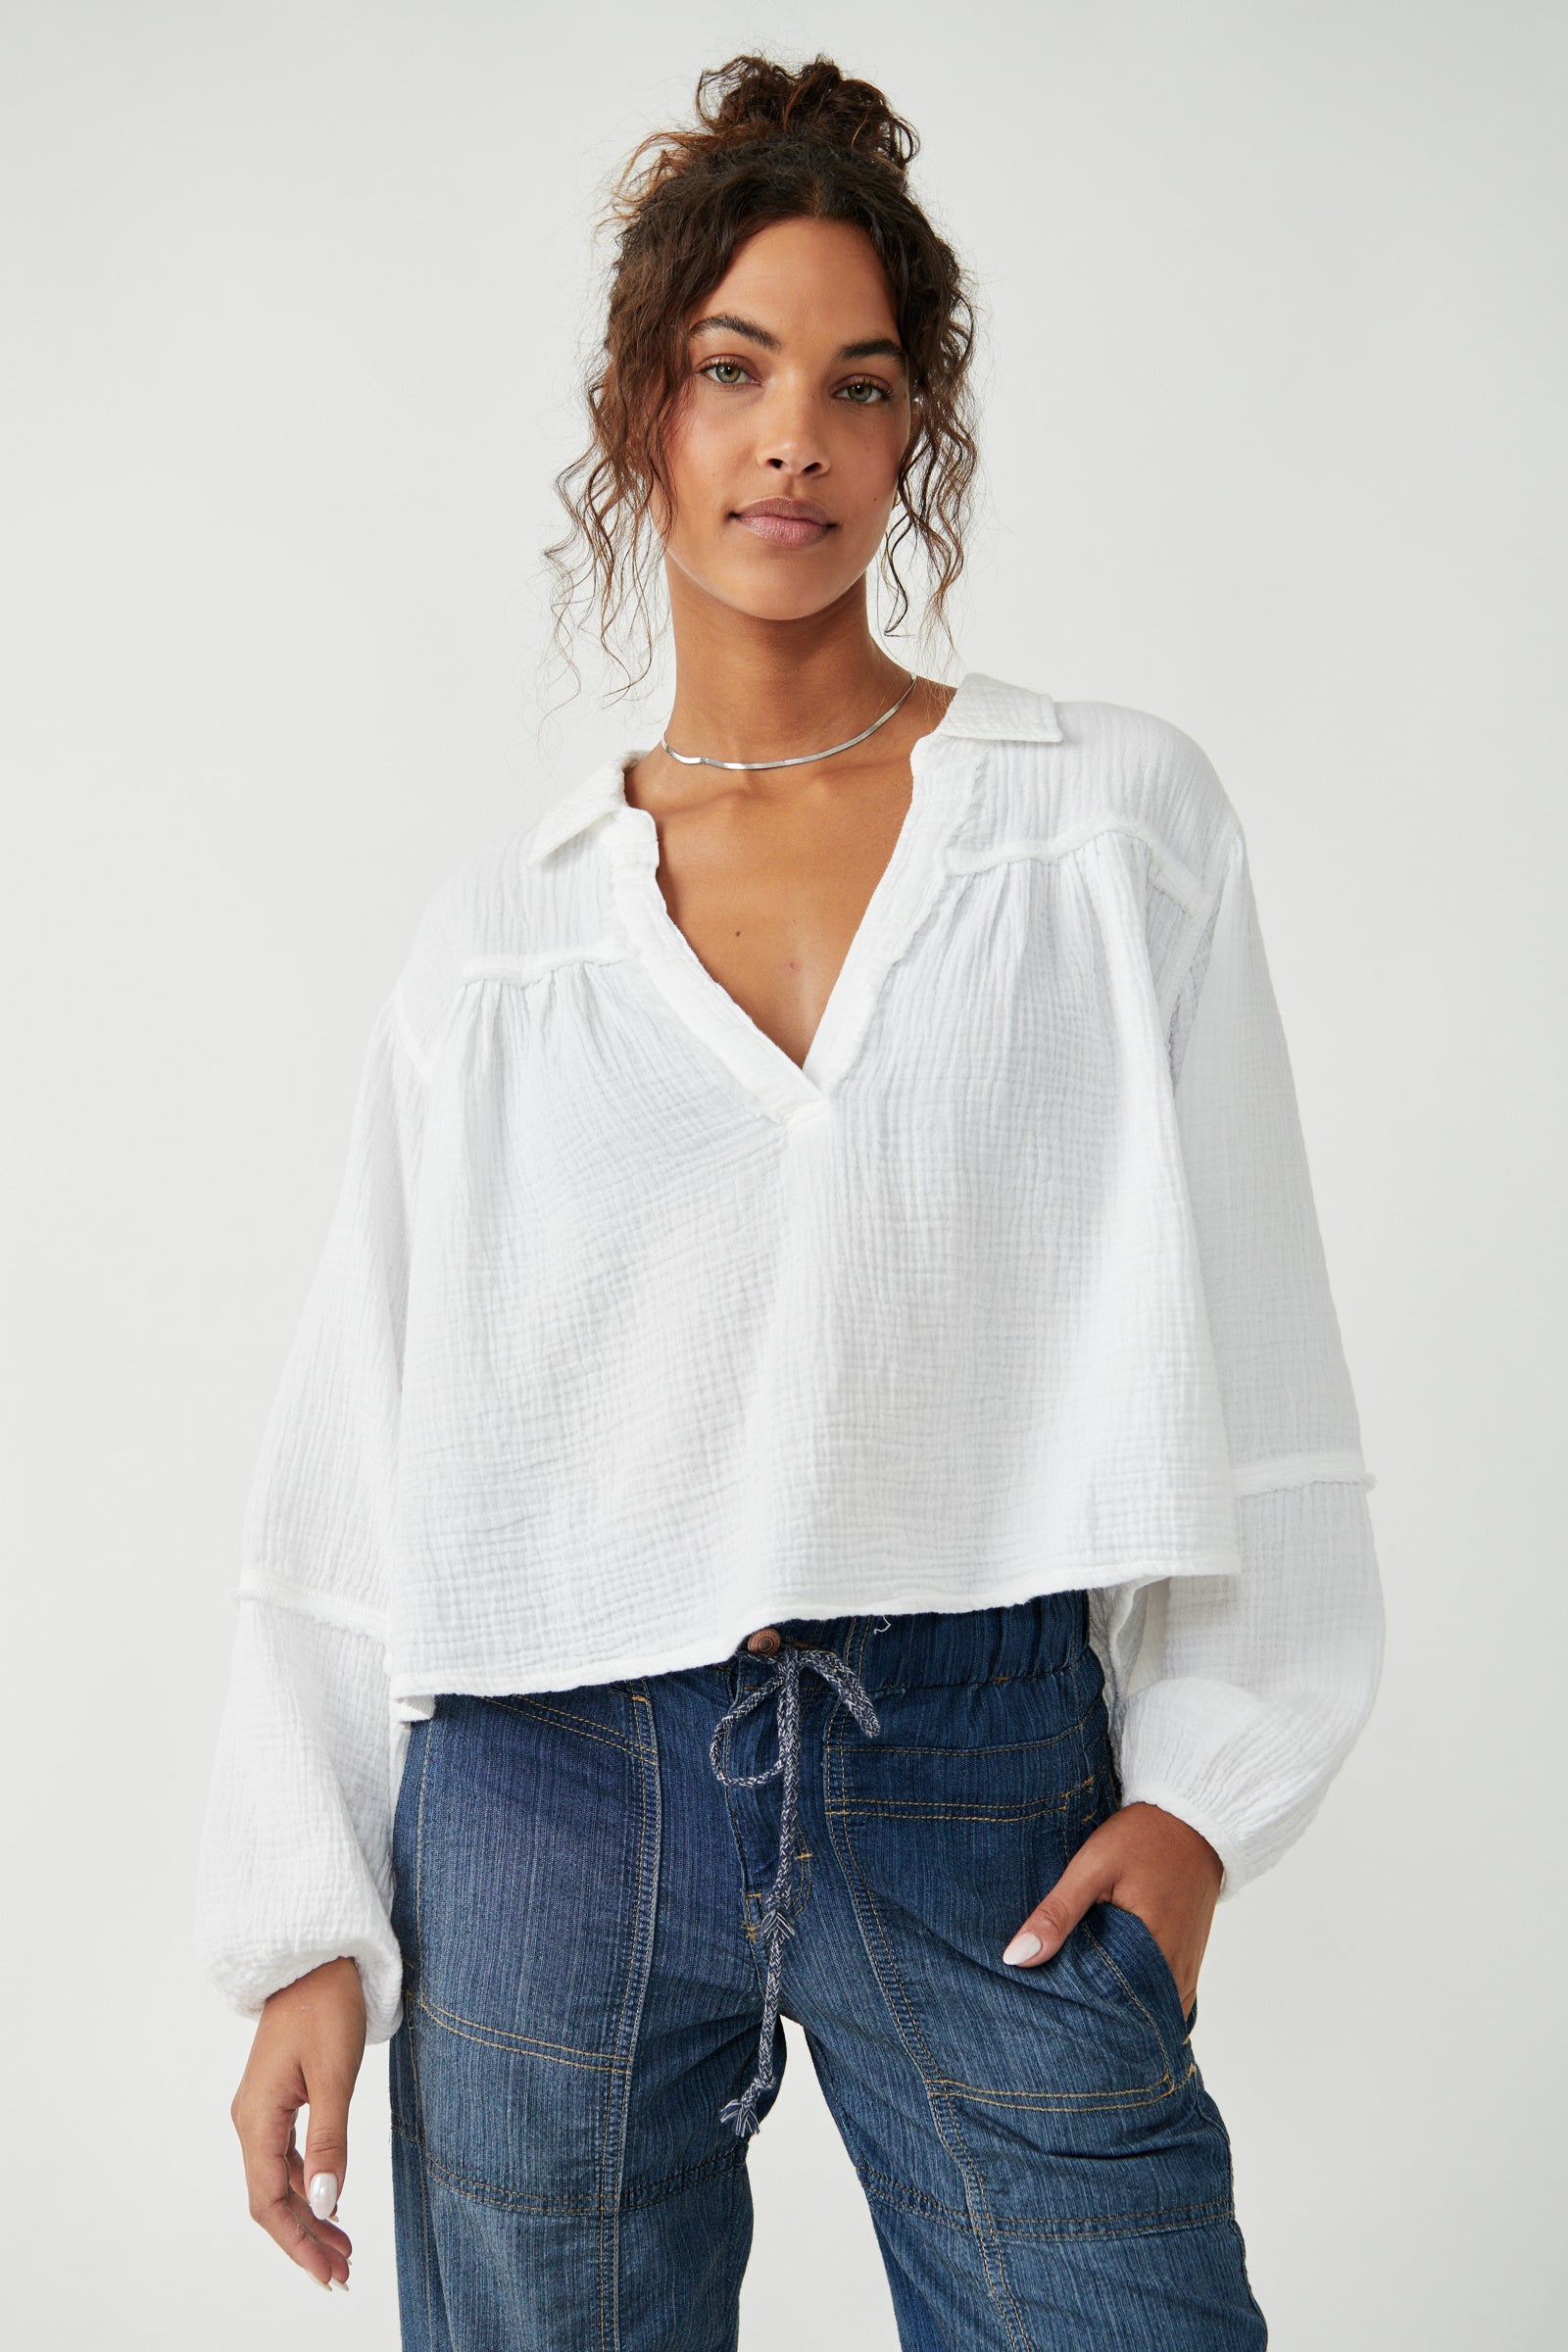 FREE PEOPLE YUCCA DOUBLE CLOTH IN OPTIC WHITE